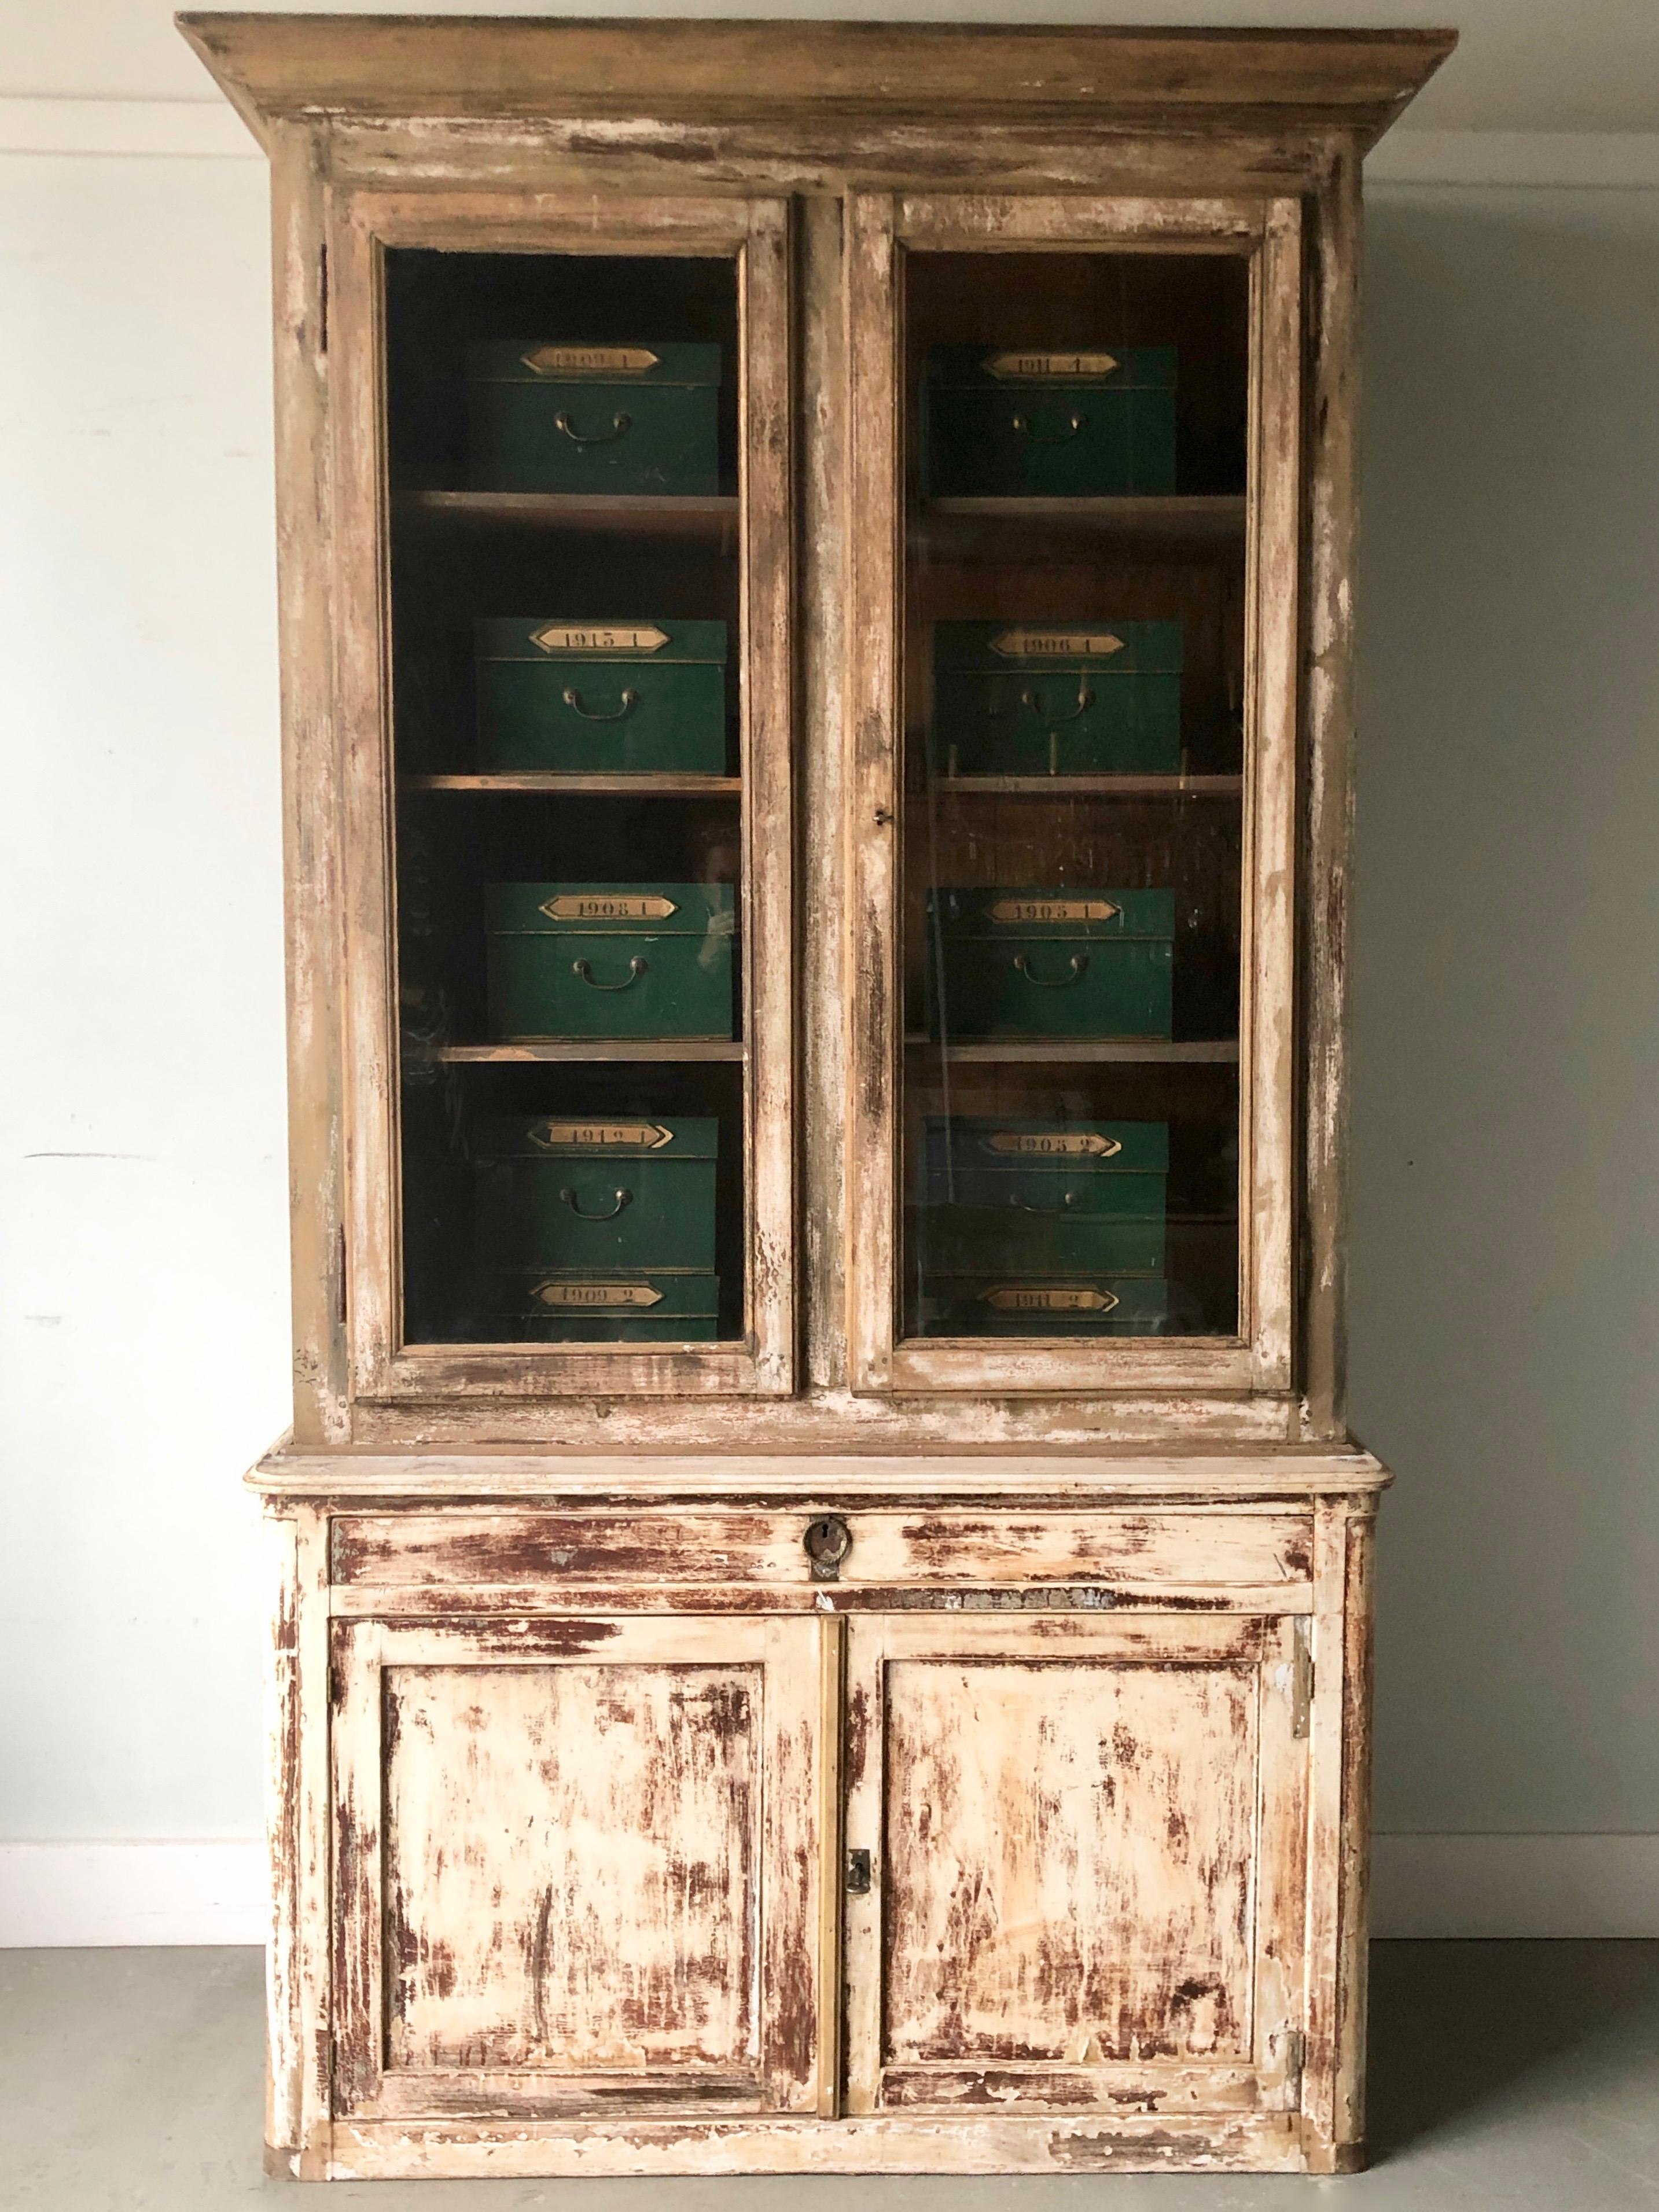 19th century painted French Bibliothèque in two parts with all original; worn paint and hardwares. France, circa 1880. Measurement are with cornice and baseboards.
Upper cabinet with three stationary shelves.
Large drawer under and lower cabinet